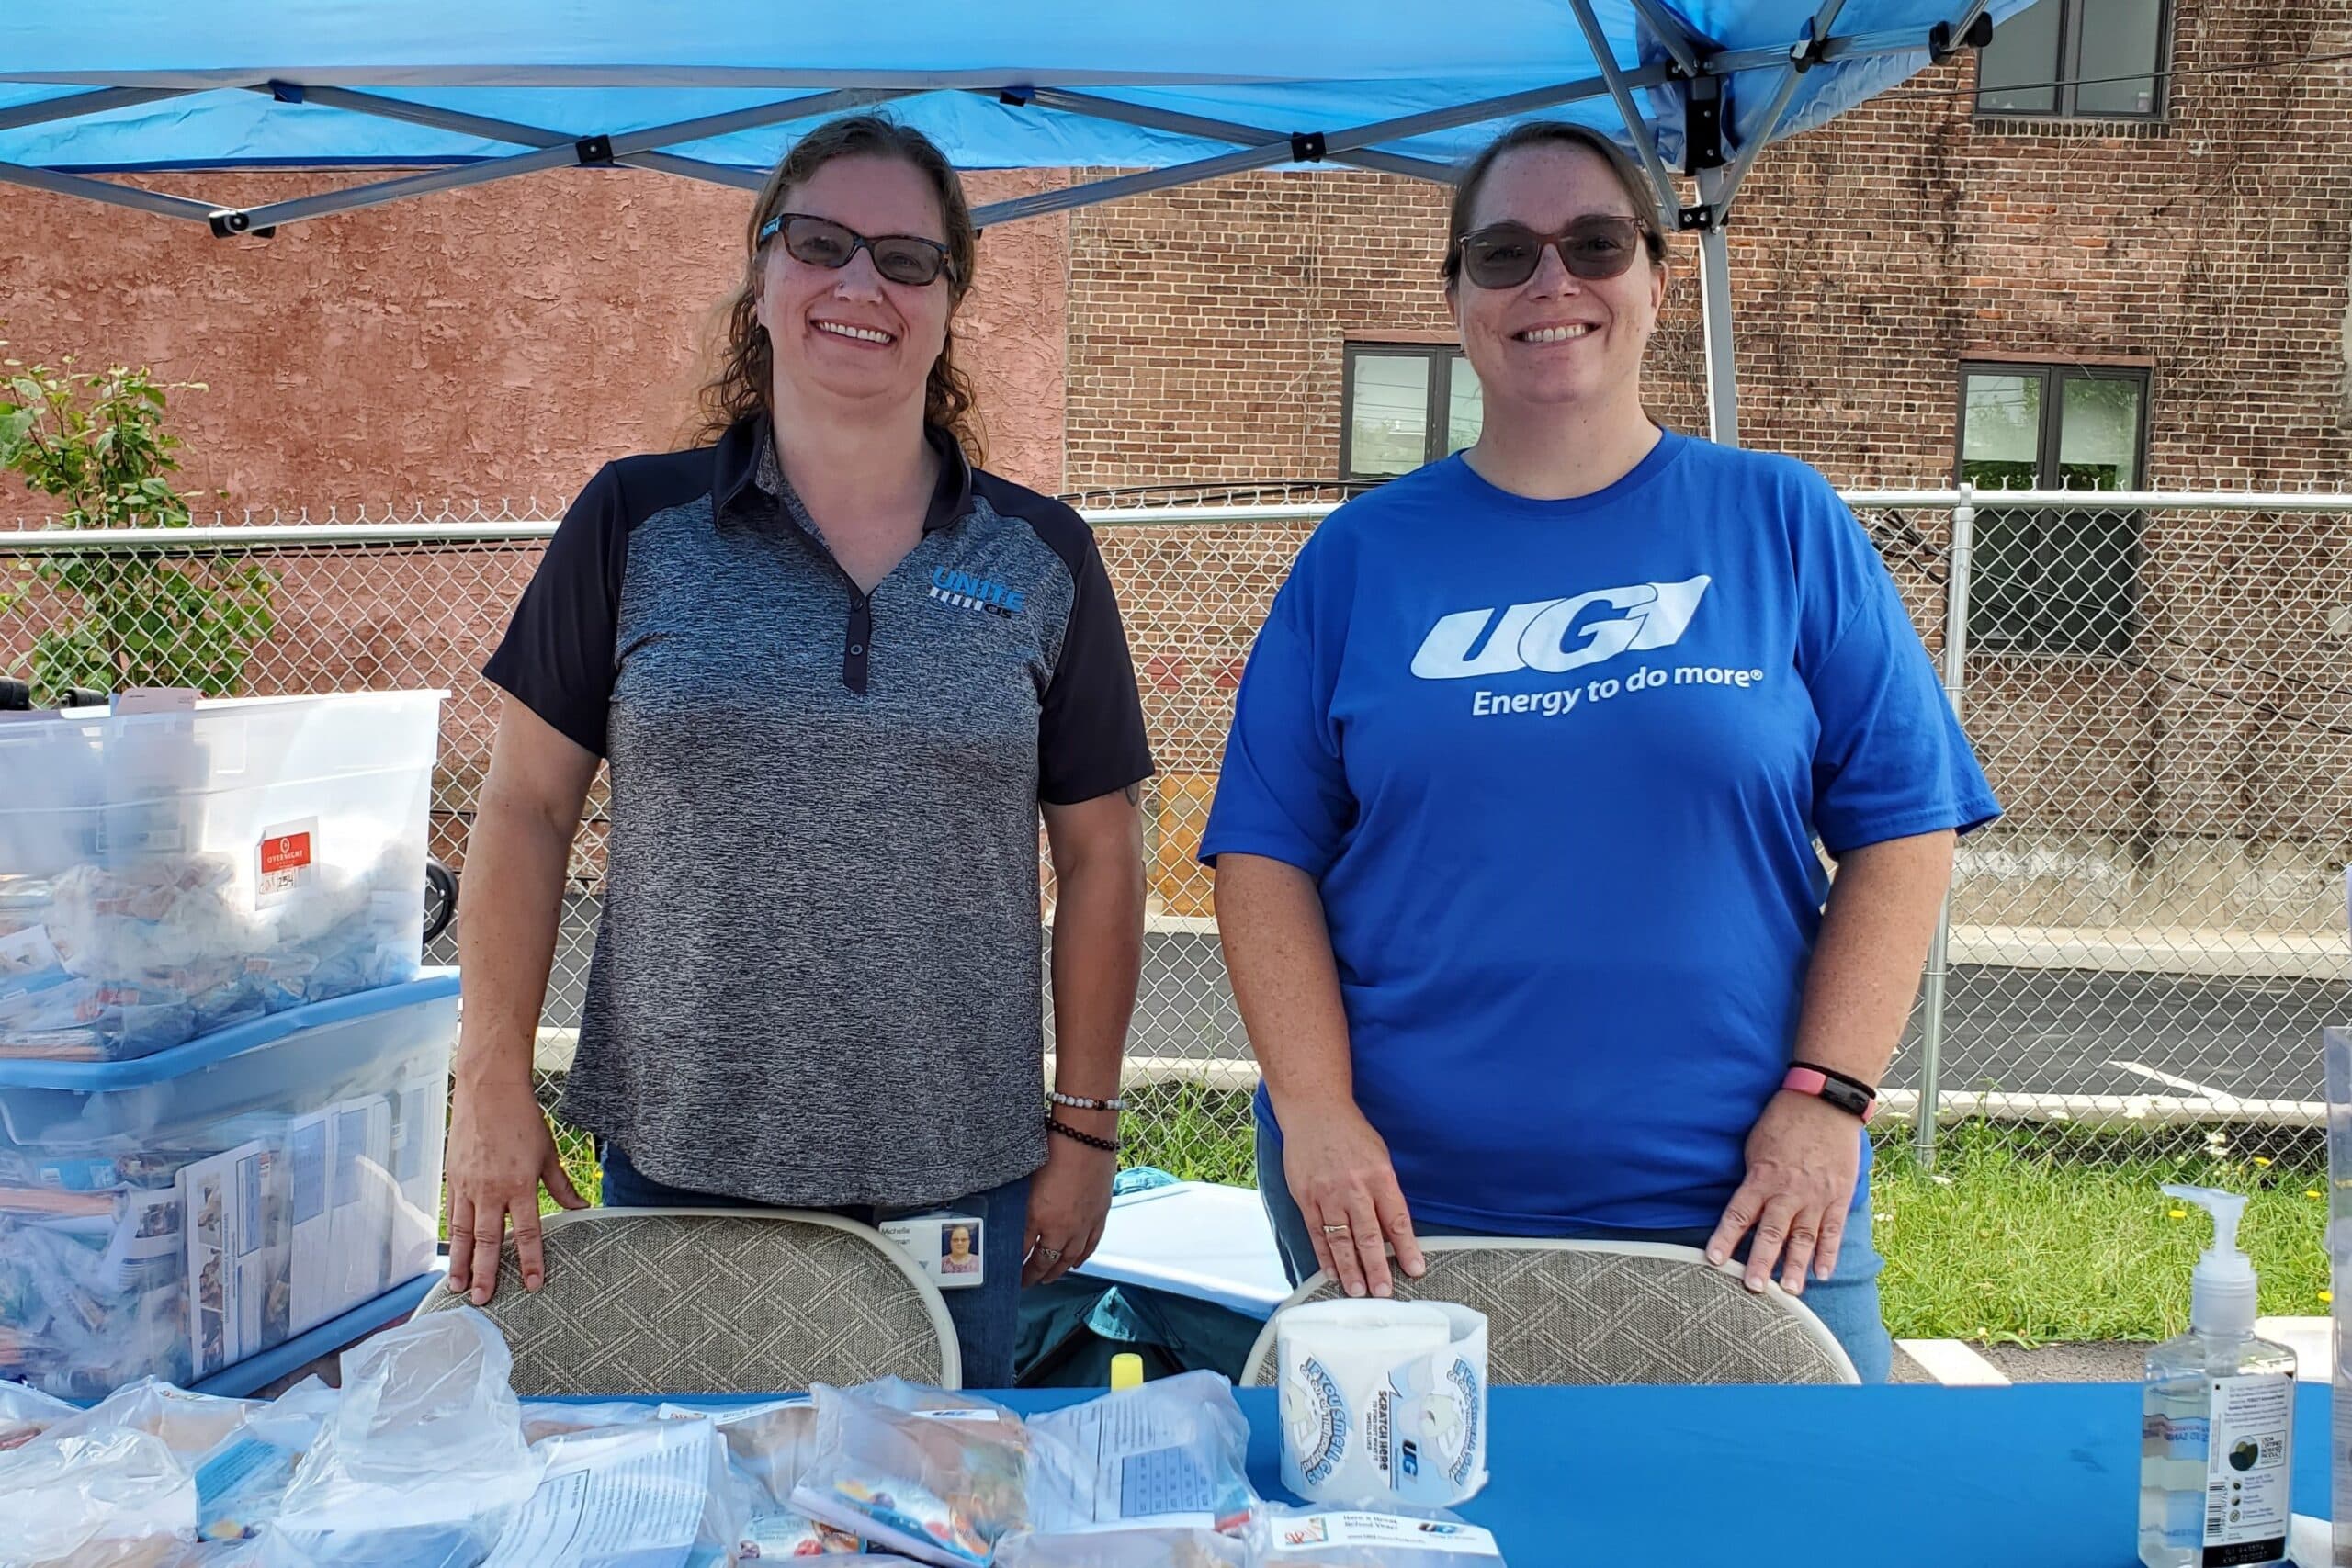 UGI employees standing at a booth with information packets for Customer Assistance Programs